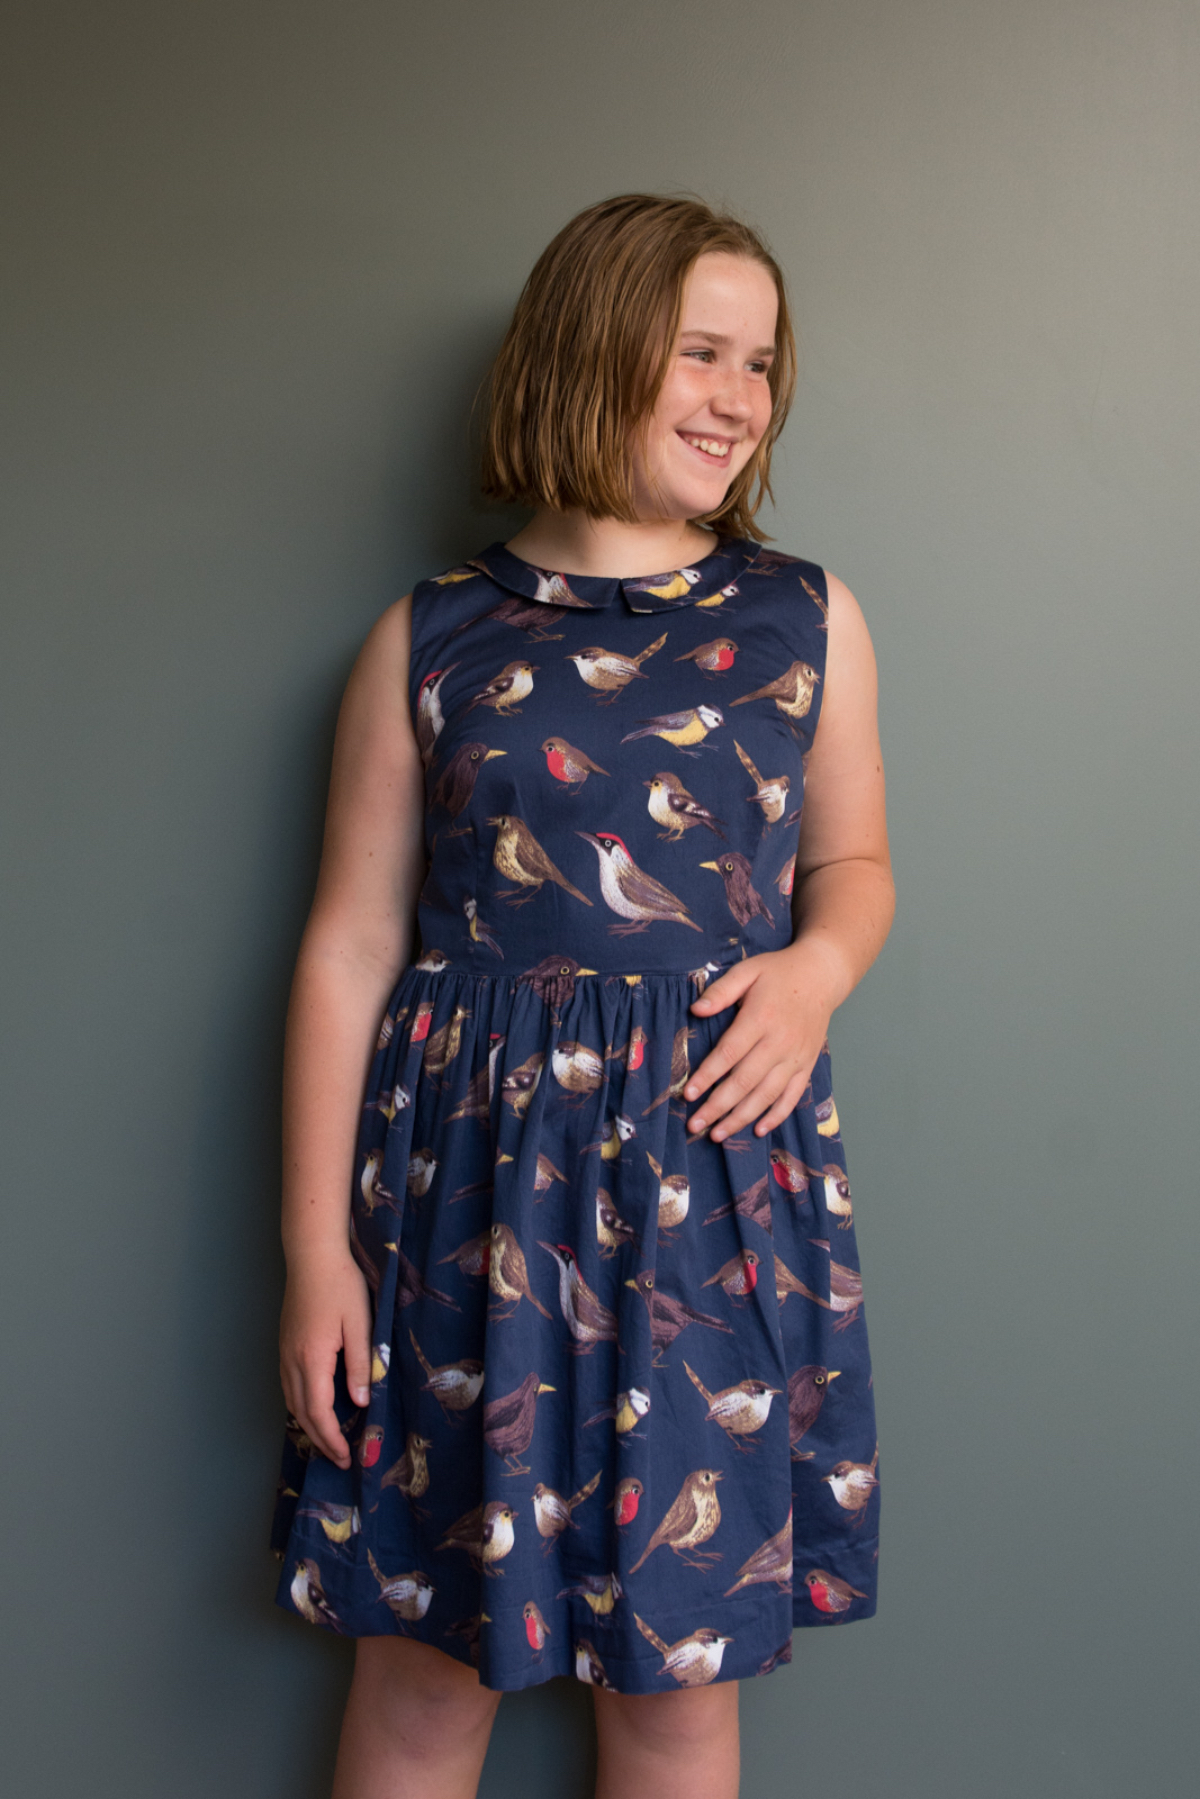 Shelley used the Building Block Dress and the Bistro Dress to create a beautiful party dress for her daughter.